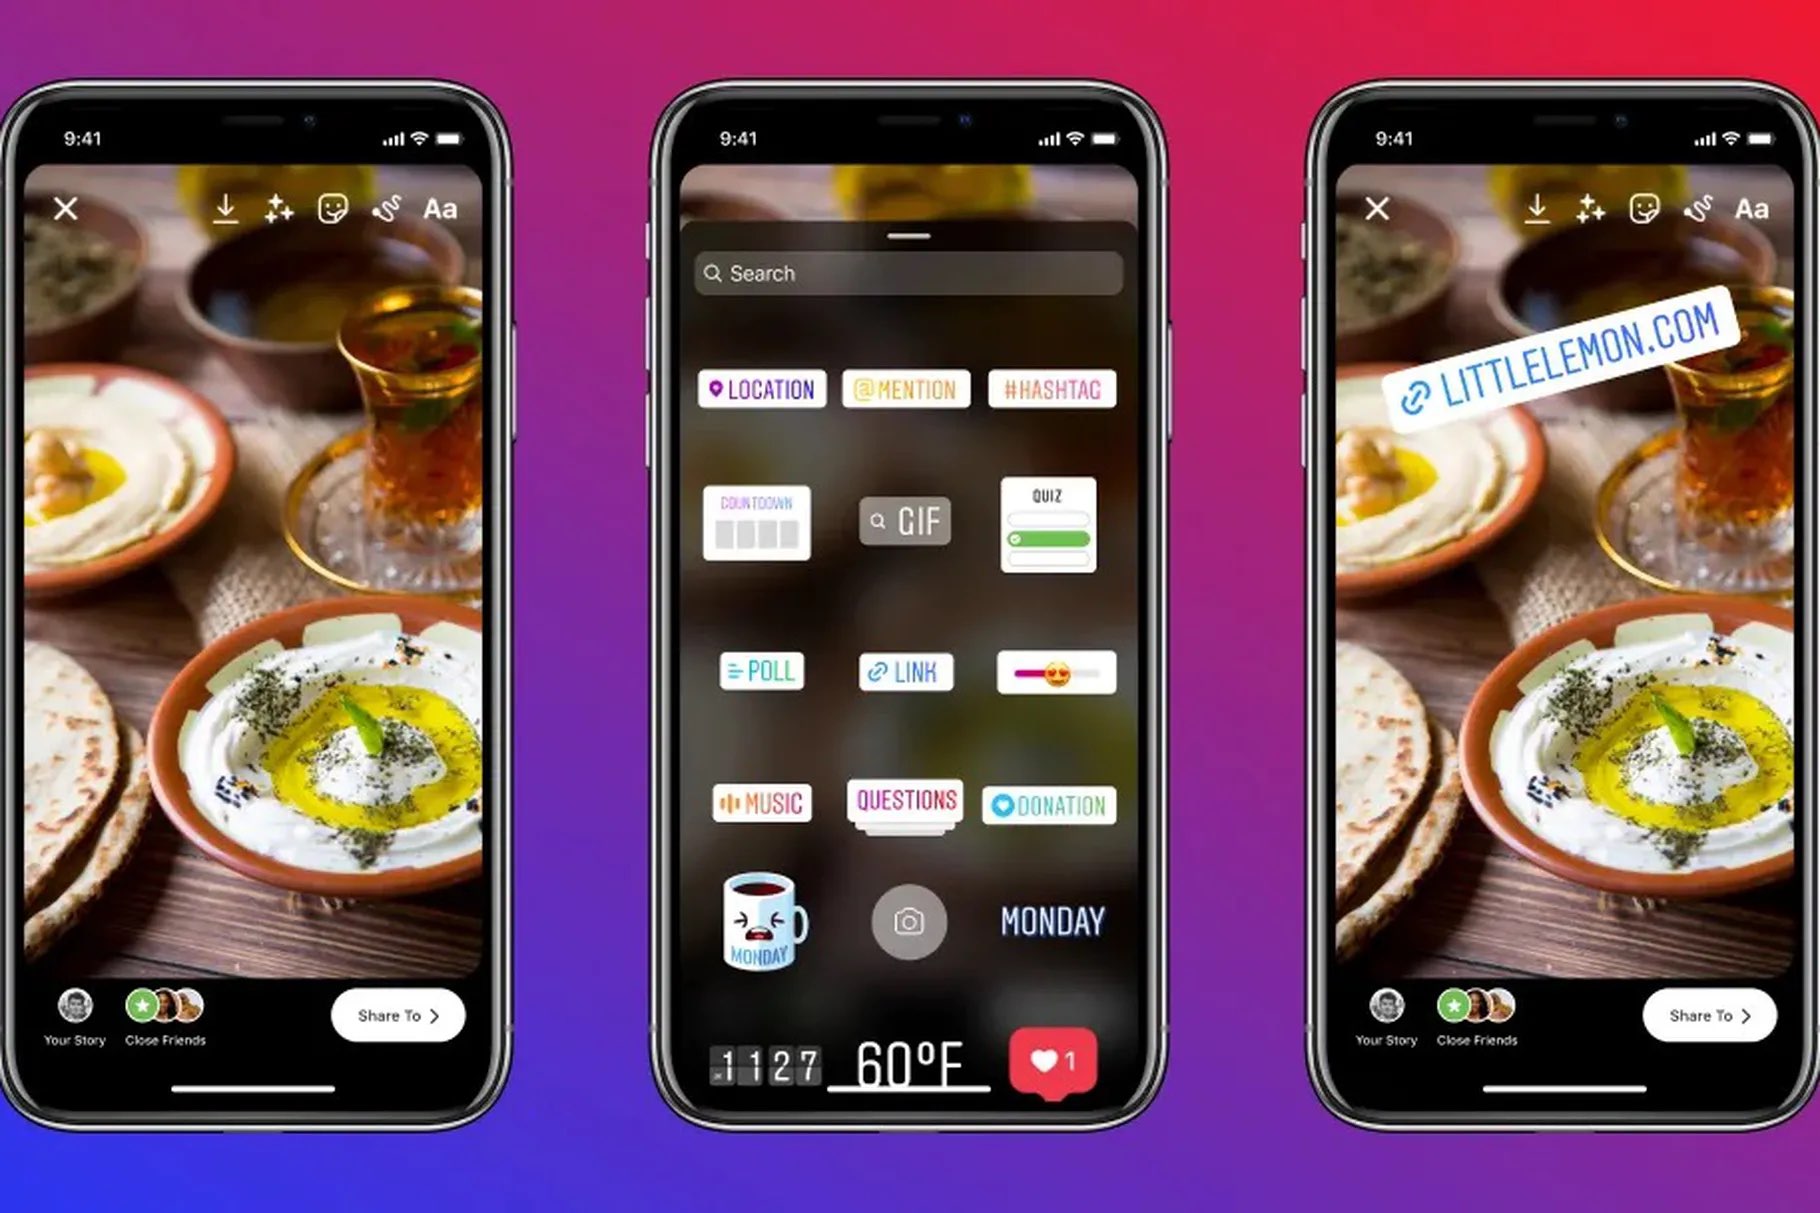 A promotional image from Instagram showing using a linking sticker for sharing links in stories on iPhone